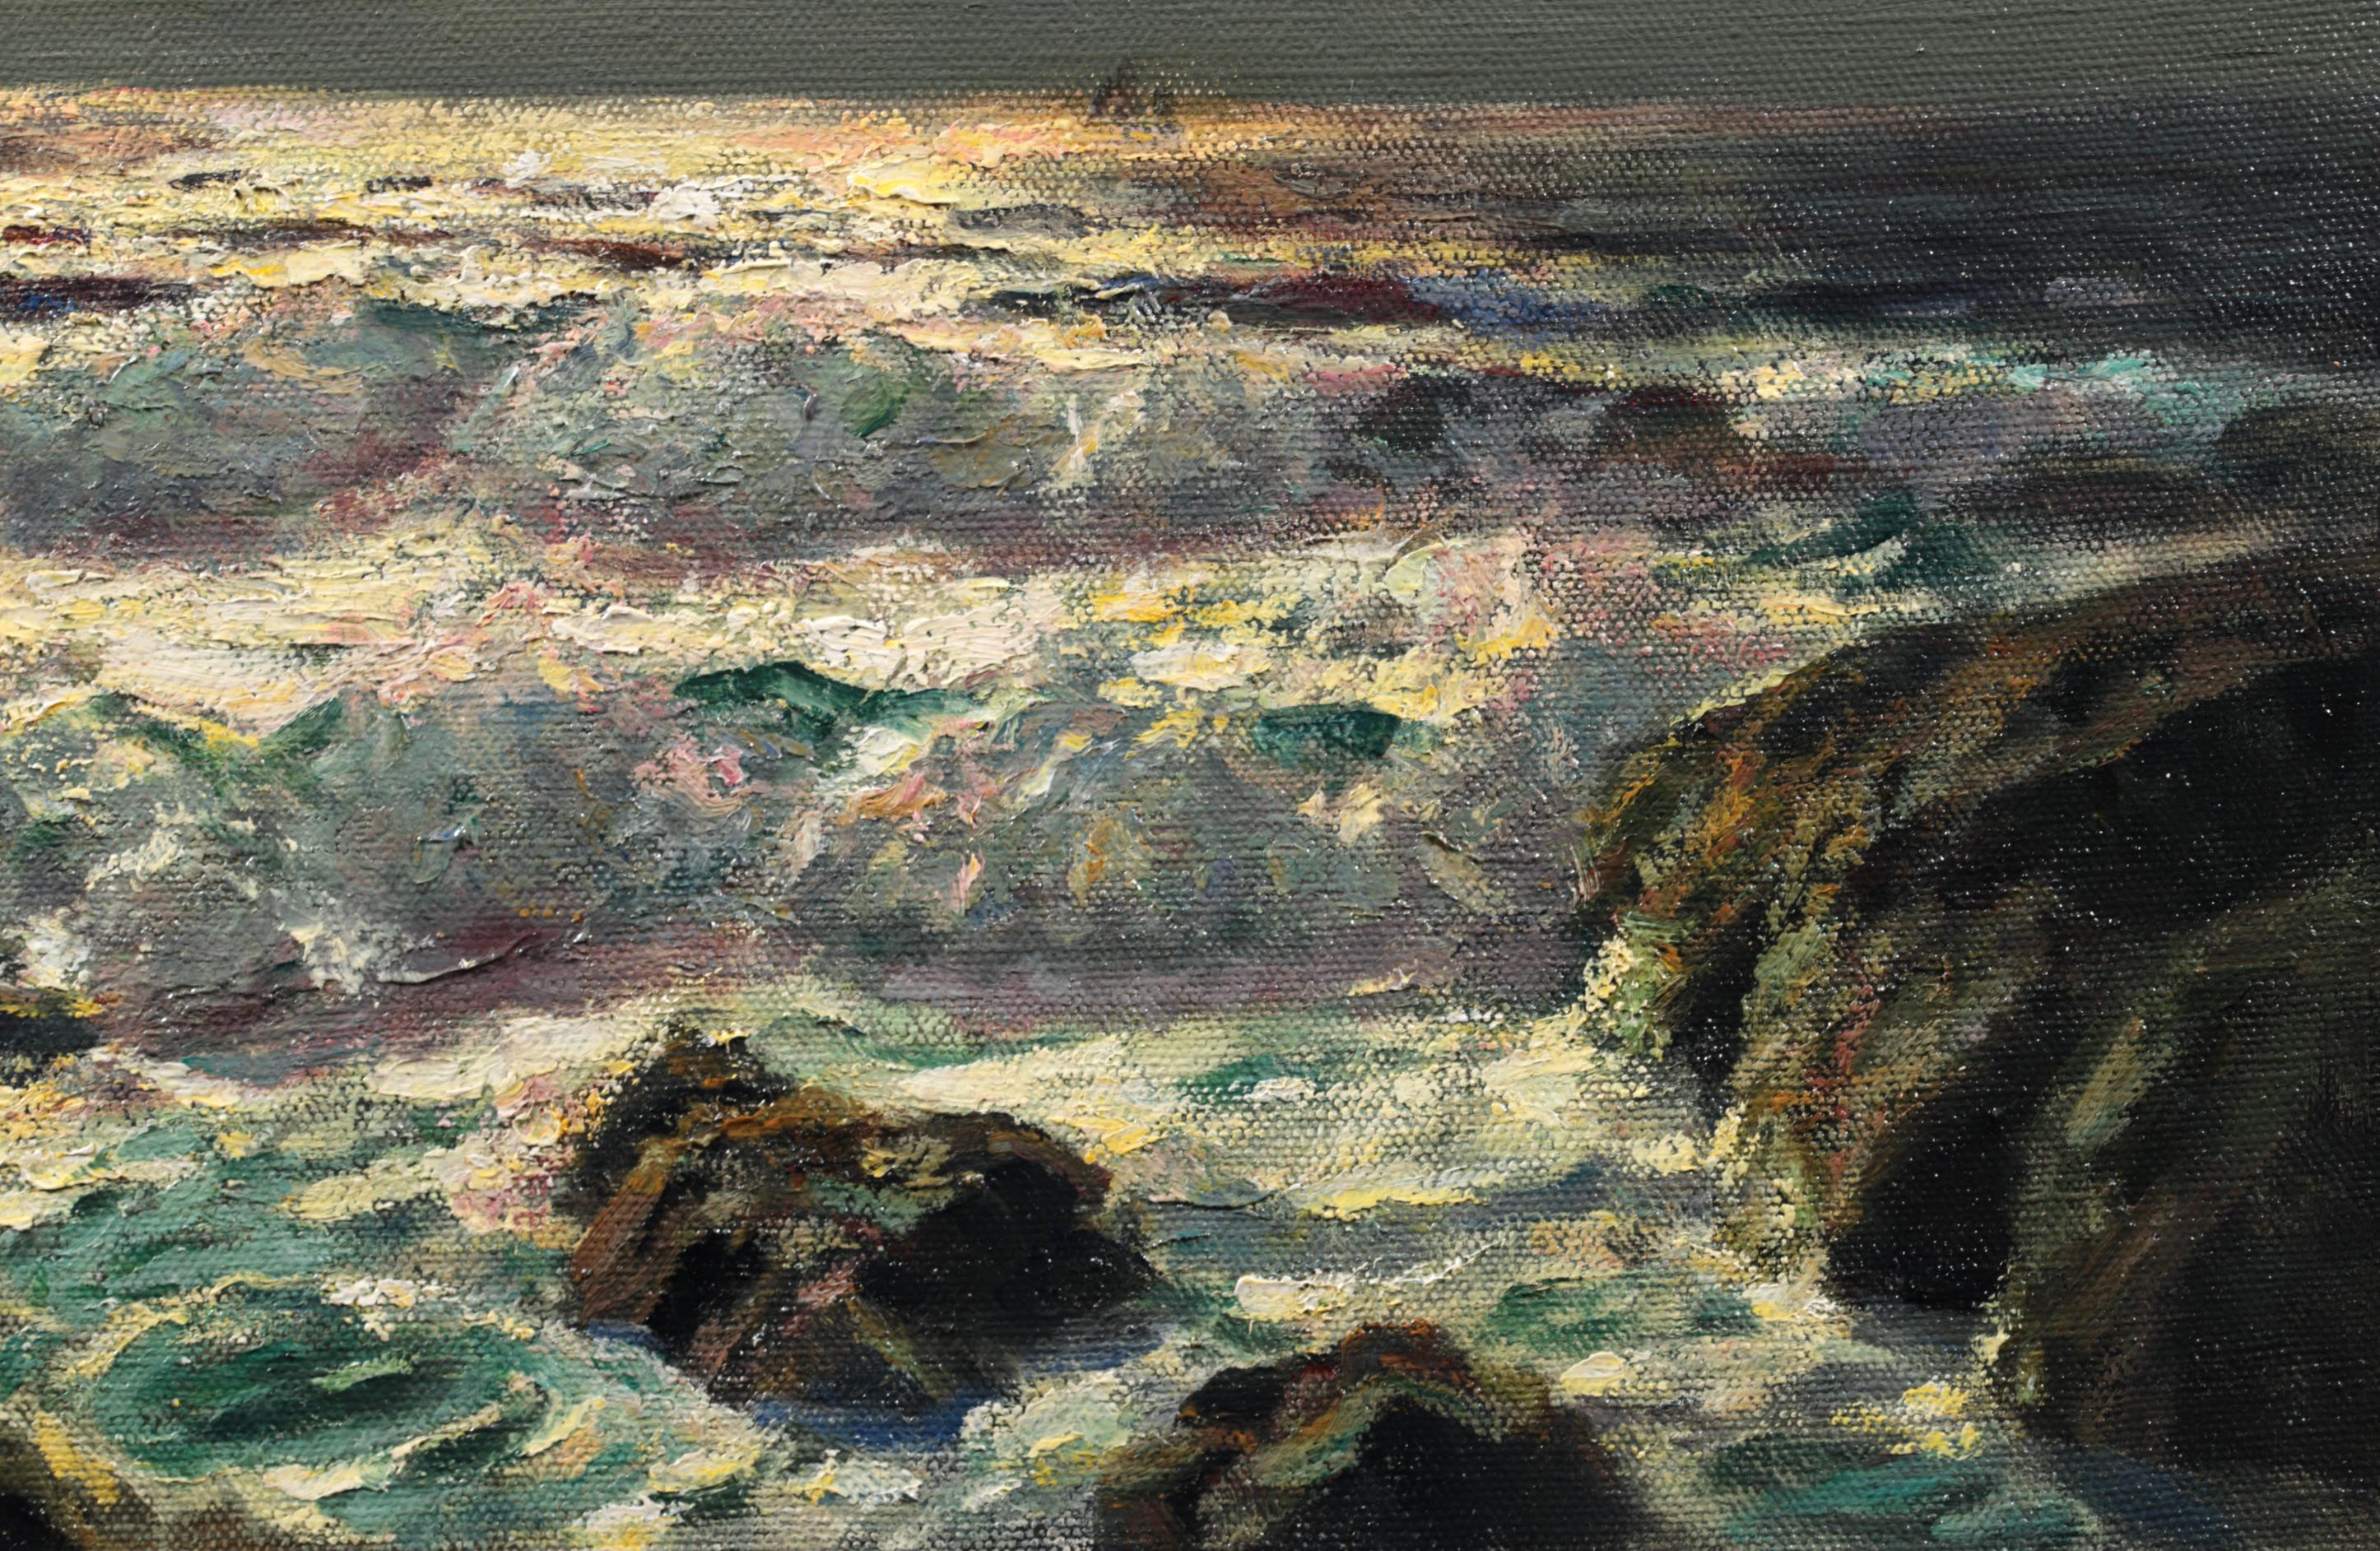 Moonlight - St Ives - British Maritime Seascape Oil Painting by Julius Olsson 4